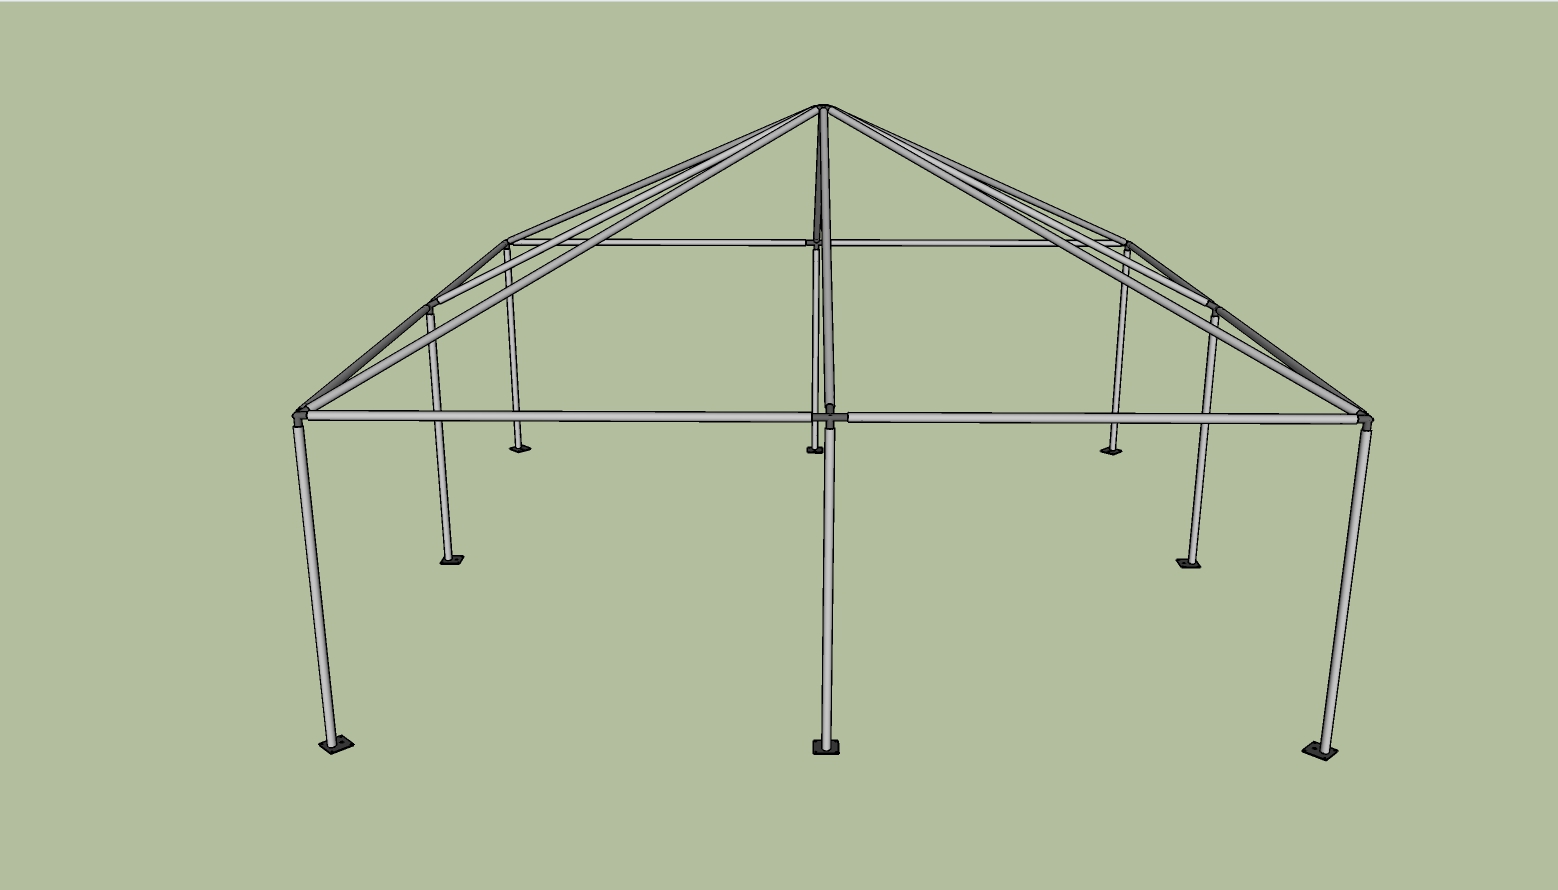 20x20 frame tent side view